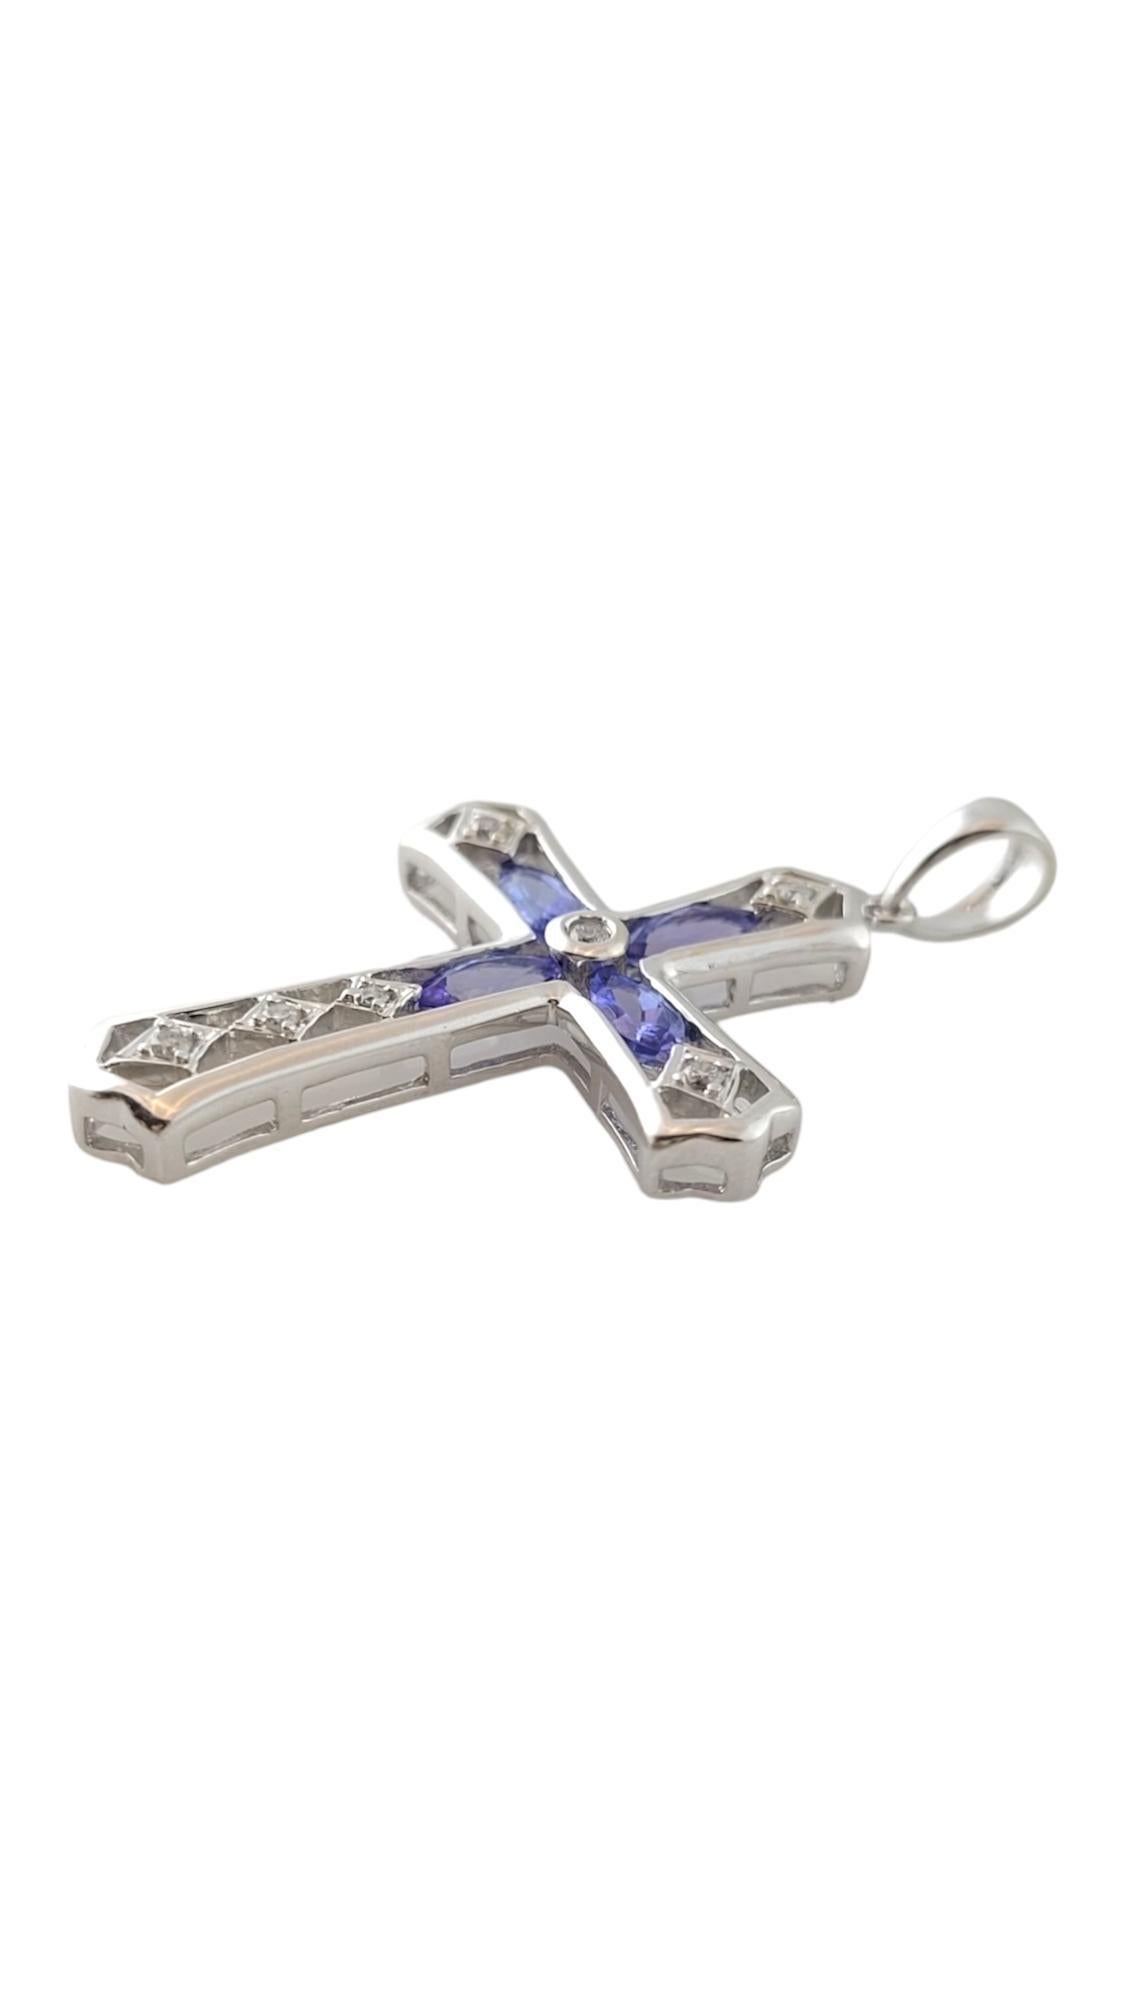 Vintage 14K White Gold Levian Tanzanite & Diamond Cross Pendant

Four gorgeous lab tested tanzanite stones and 6 sparkling round brilliant cut diamonds are paired together on this 14K white gold cross to make a beautiful pendant good for any chain